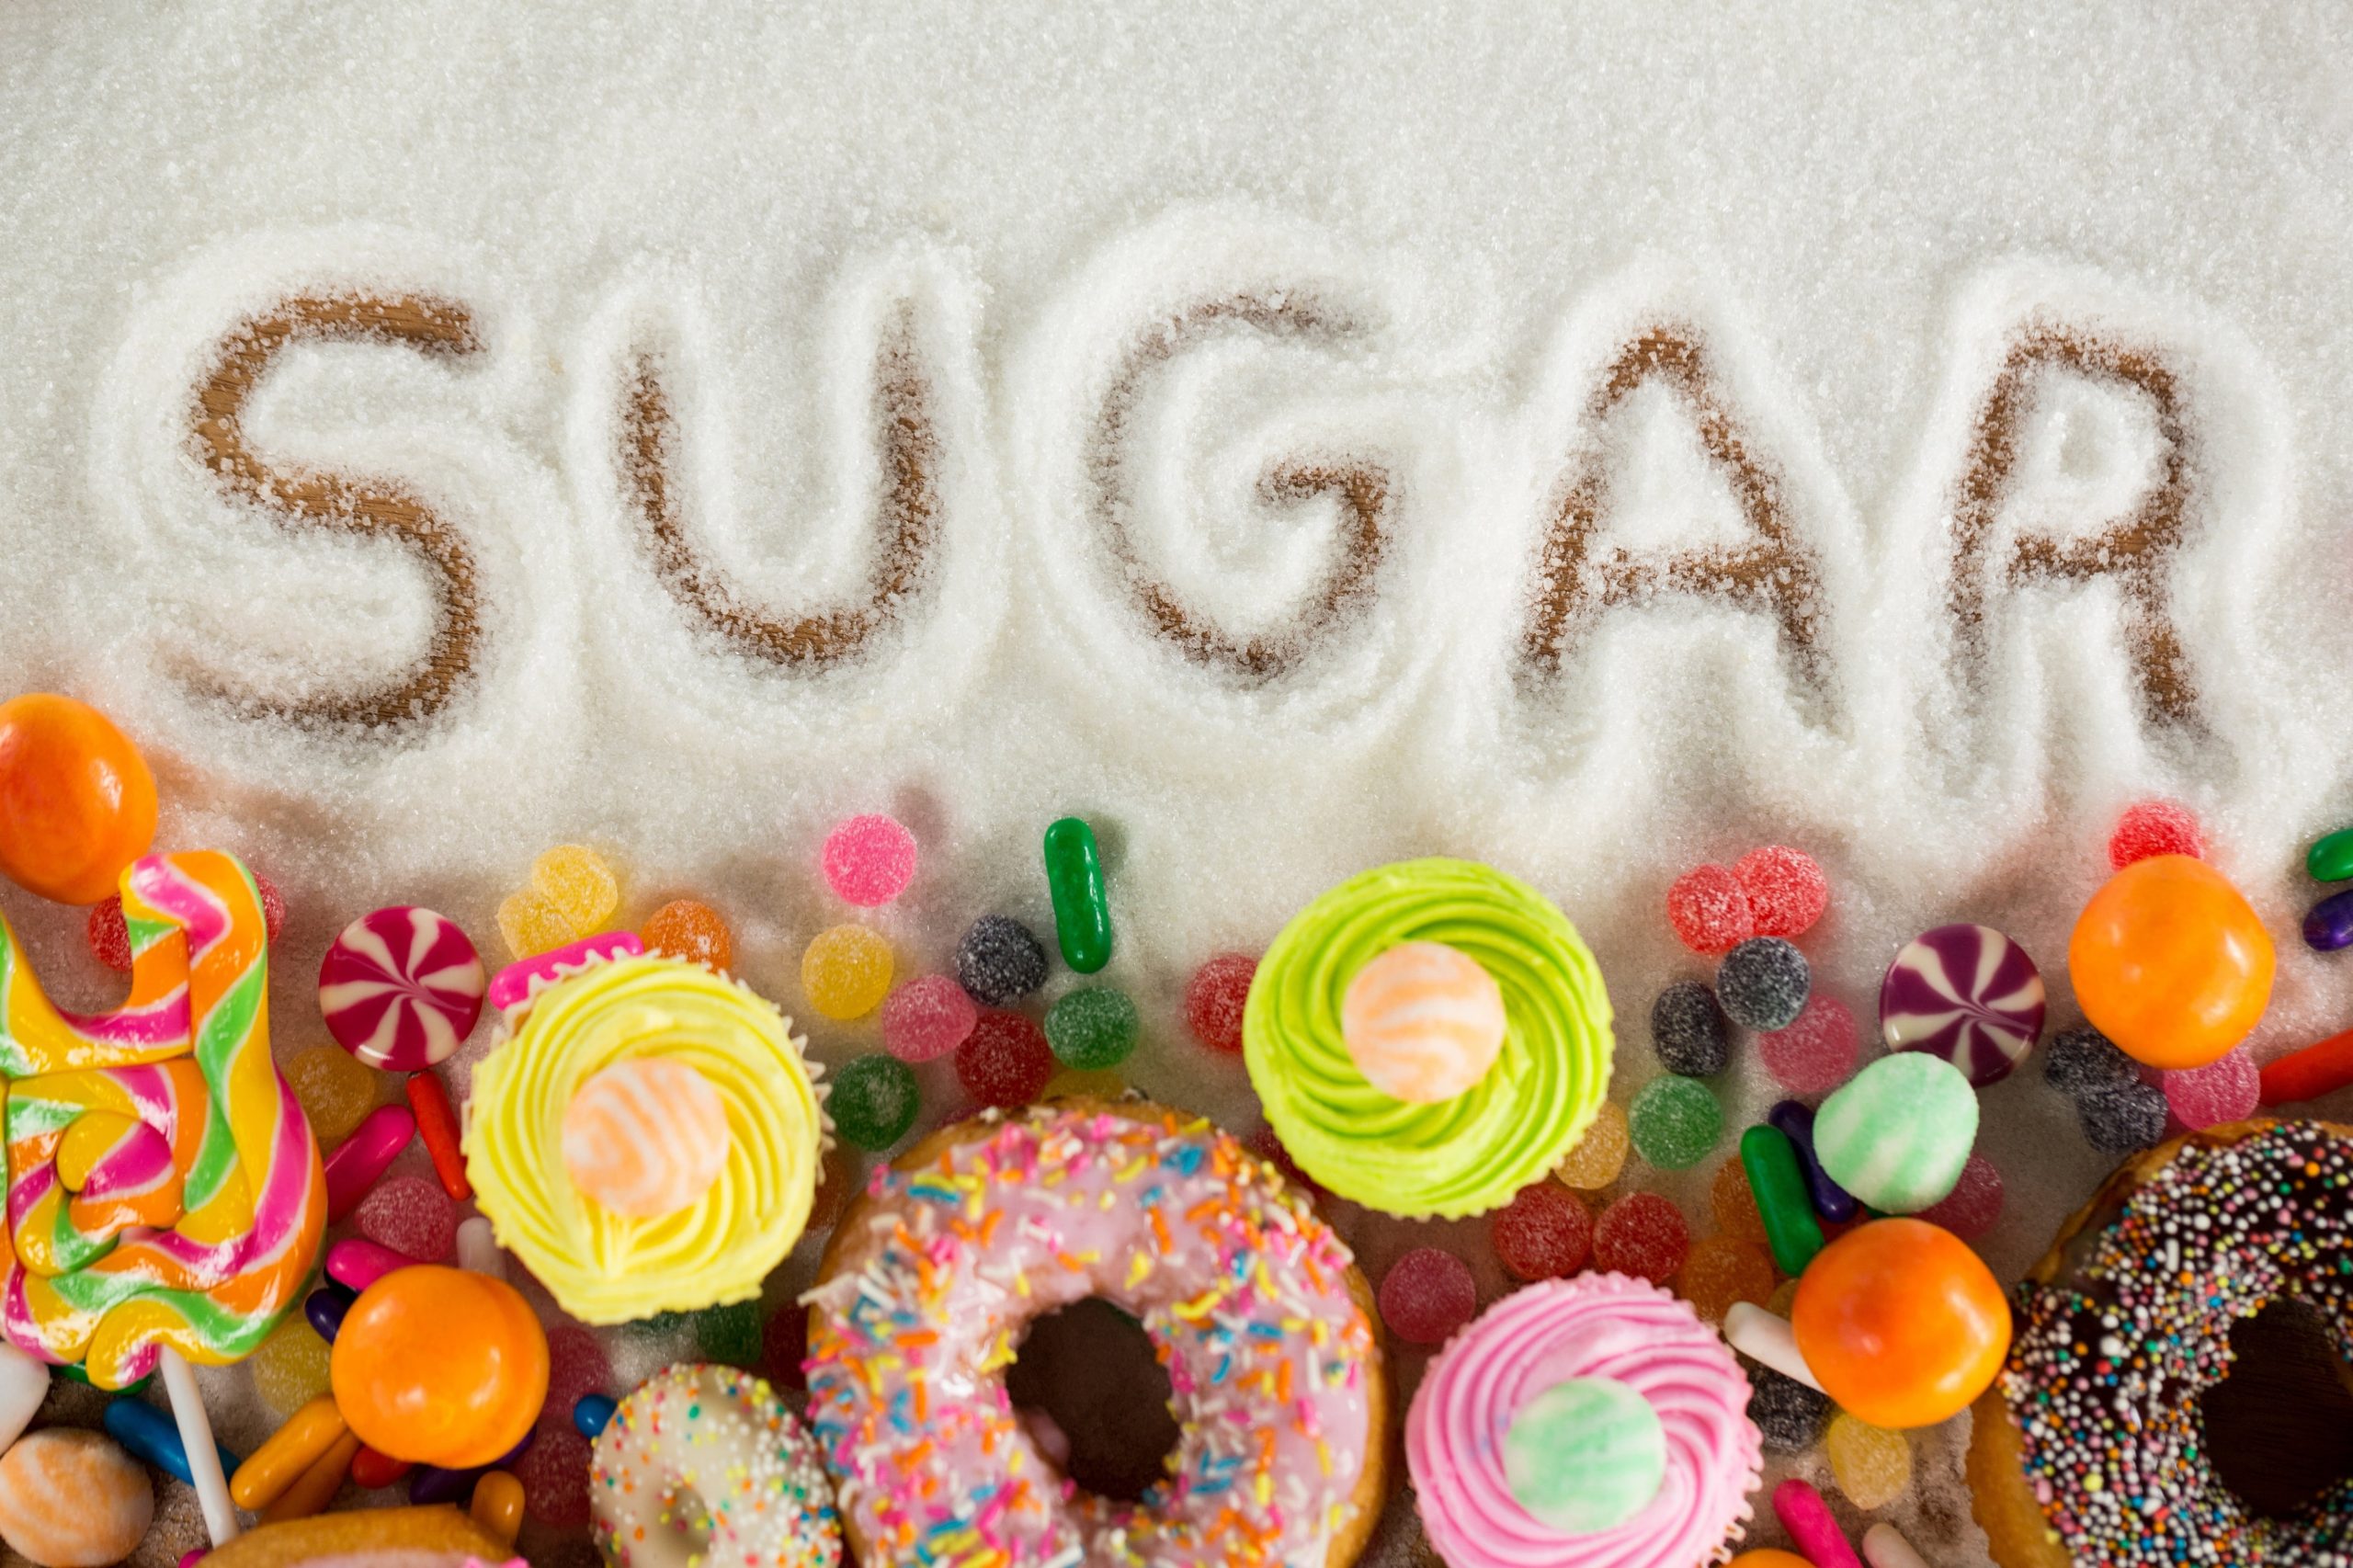 Sugar or No Sugar? Artificial Sweeteners Lead to Obesity ...